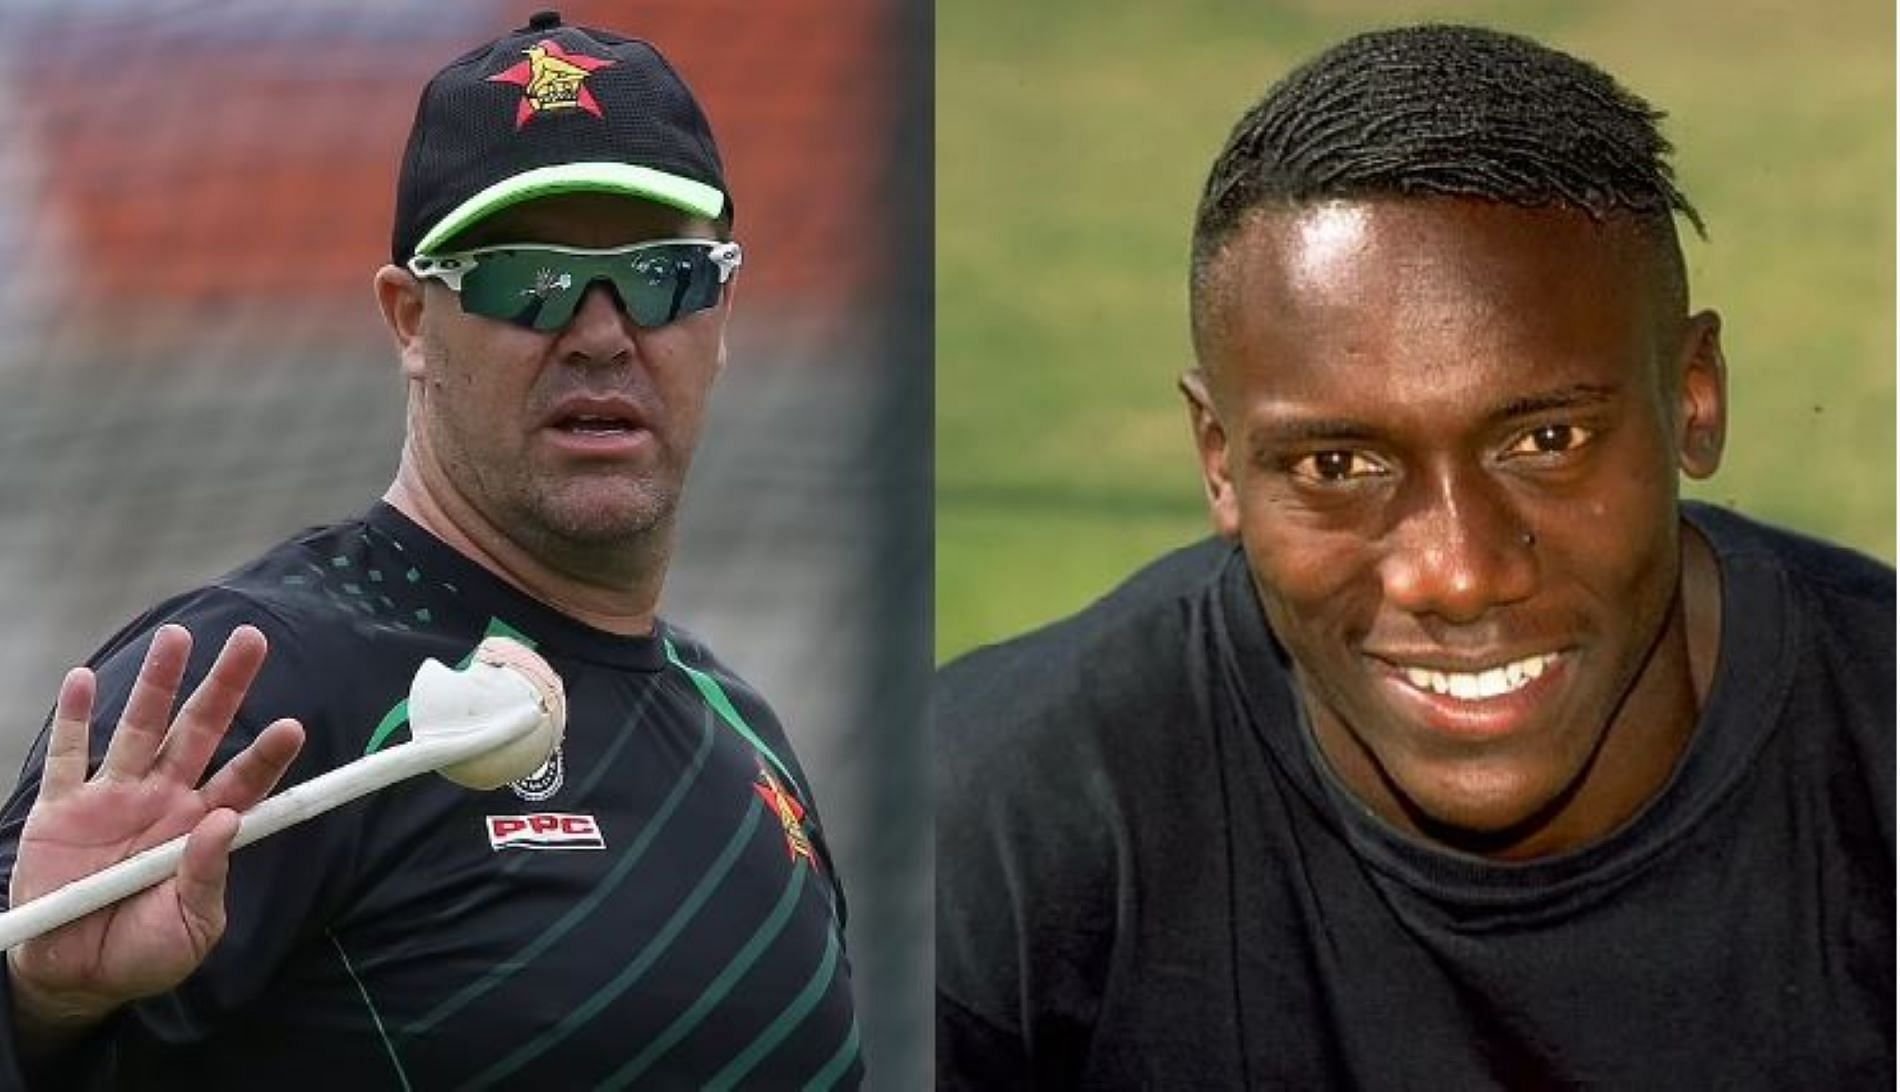 Streak and Olonga were teammates in the late 90s and early 2000s